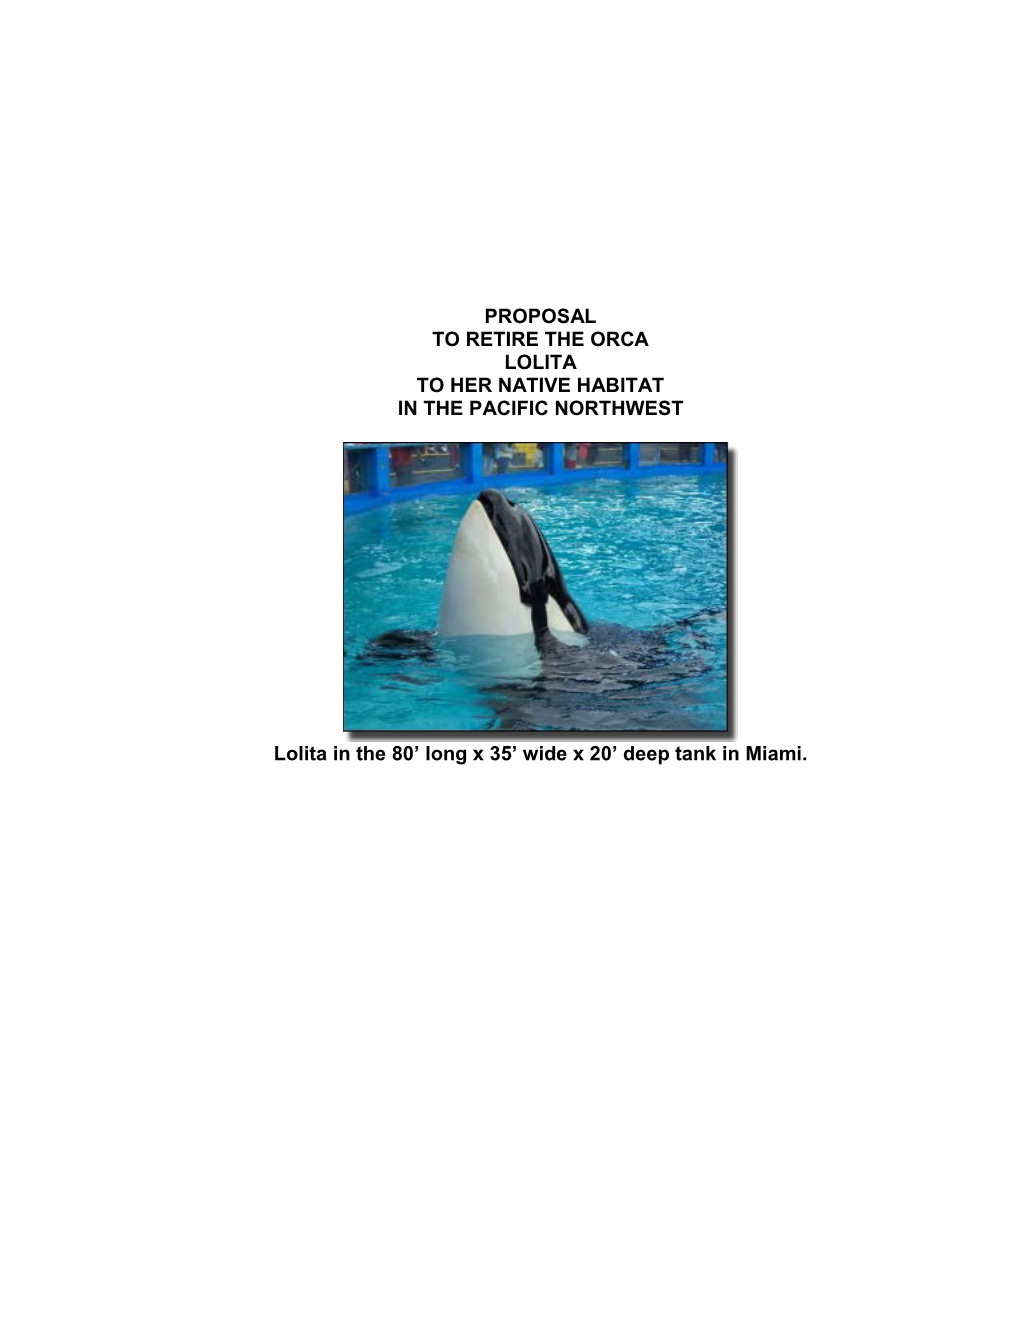 Proposal to Retire the Orca Tokitae/Lolita to Her Native Habitat in the Pacific Northwest